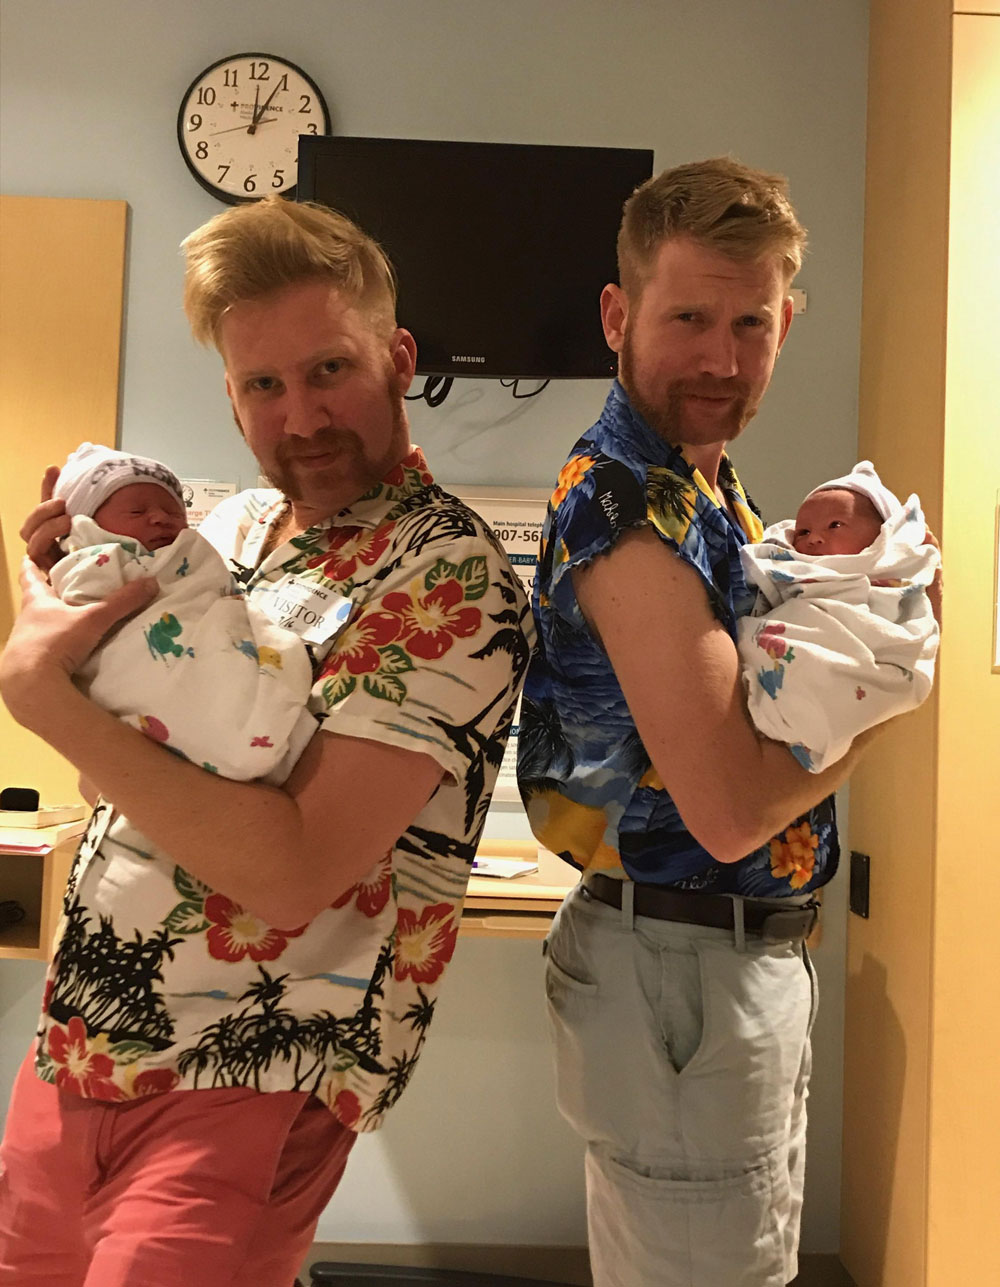 My brother and I became uncles this week to twins. First impressions are important, so naturally we shaved and dressed to impress